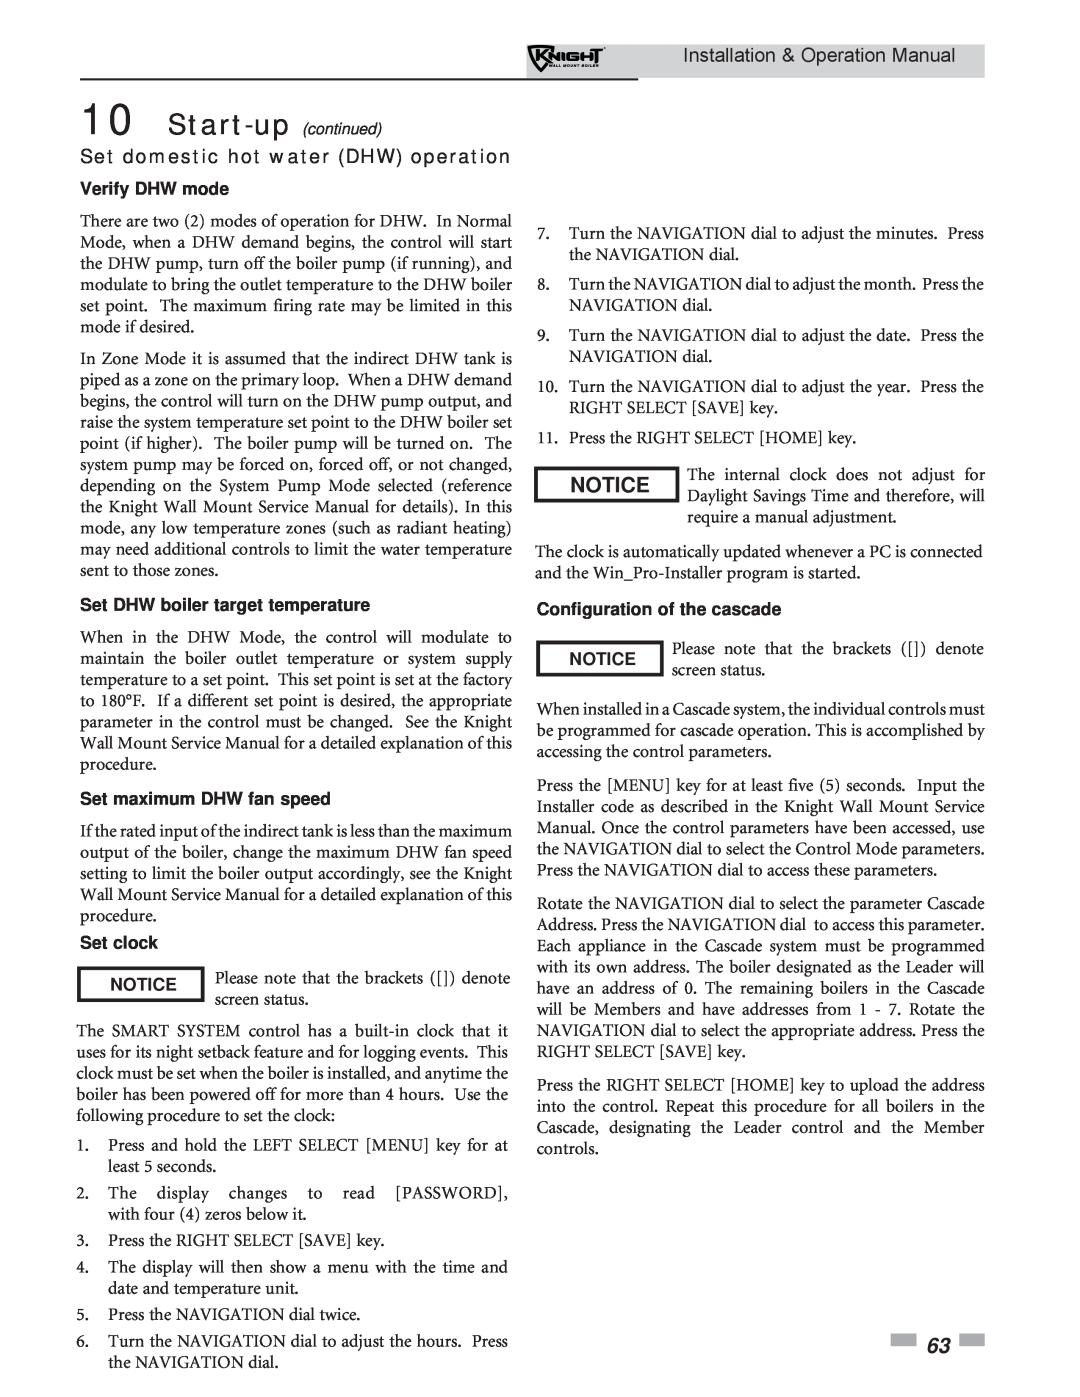 Lochinvar WH 55-399 Notice, Set domestic hot water DHW operation, Verify DHW mode, Set DHW boiler target temperature 